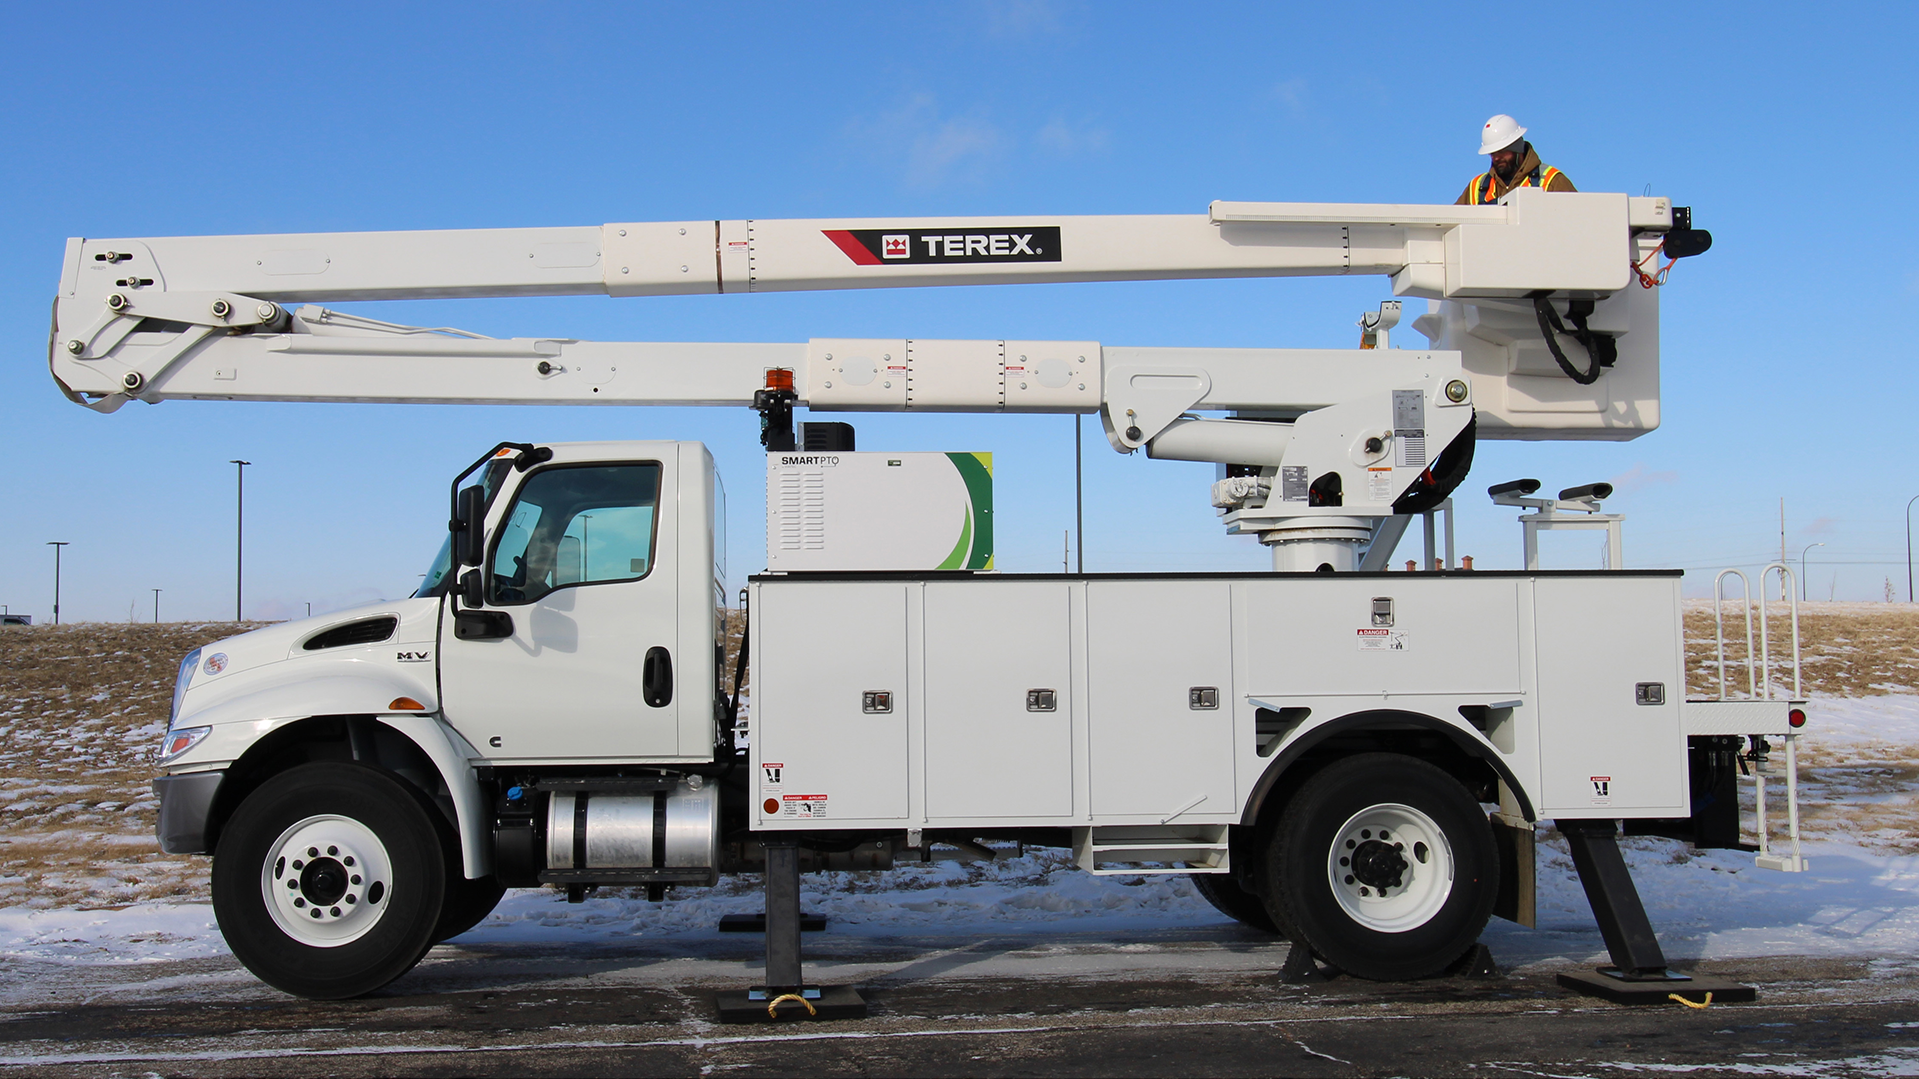 alt= Terex Hypower hybrid work truck outfitted with Viatec's SmartPTO backdropped with a blue sky